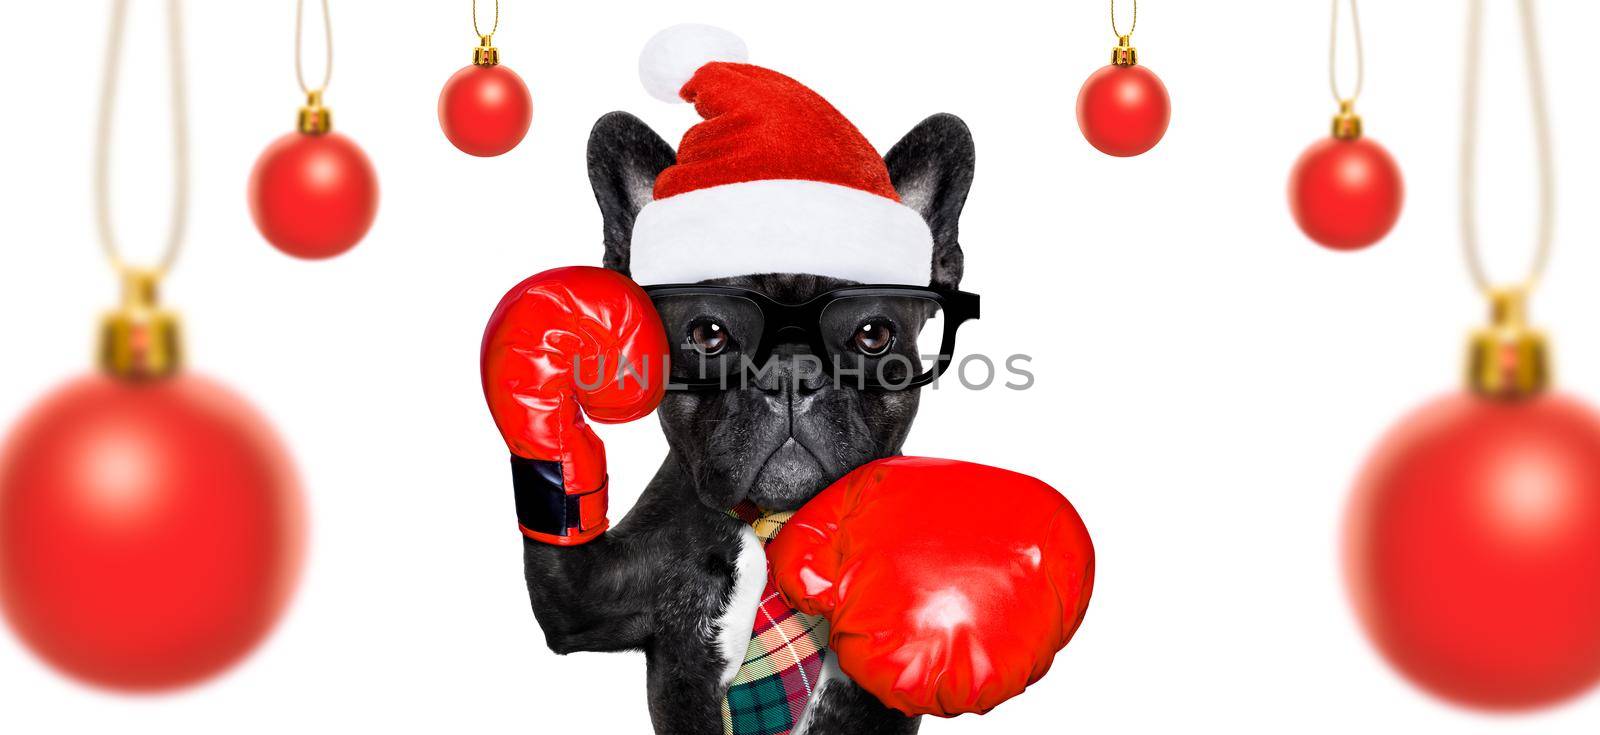 boxer french bulldog dog with nerd glasses and soprt gloves as an office business worker, isolated on white background, on christmas holidays vacation with santa claus hat